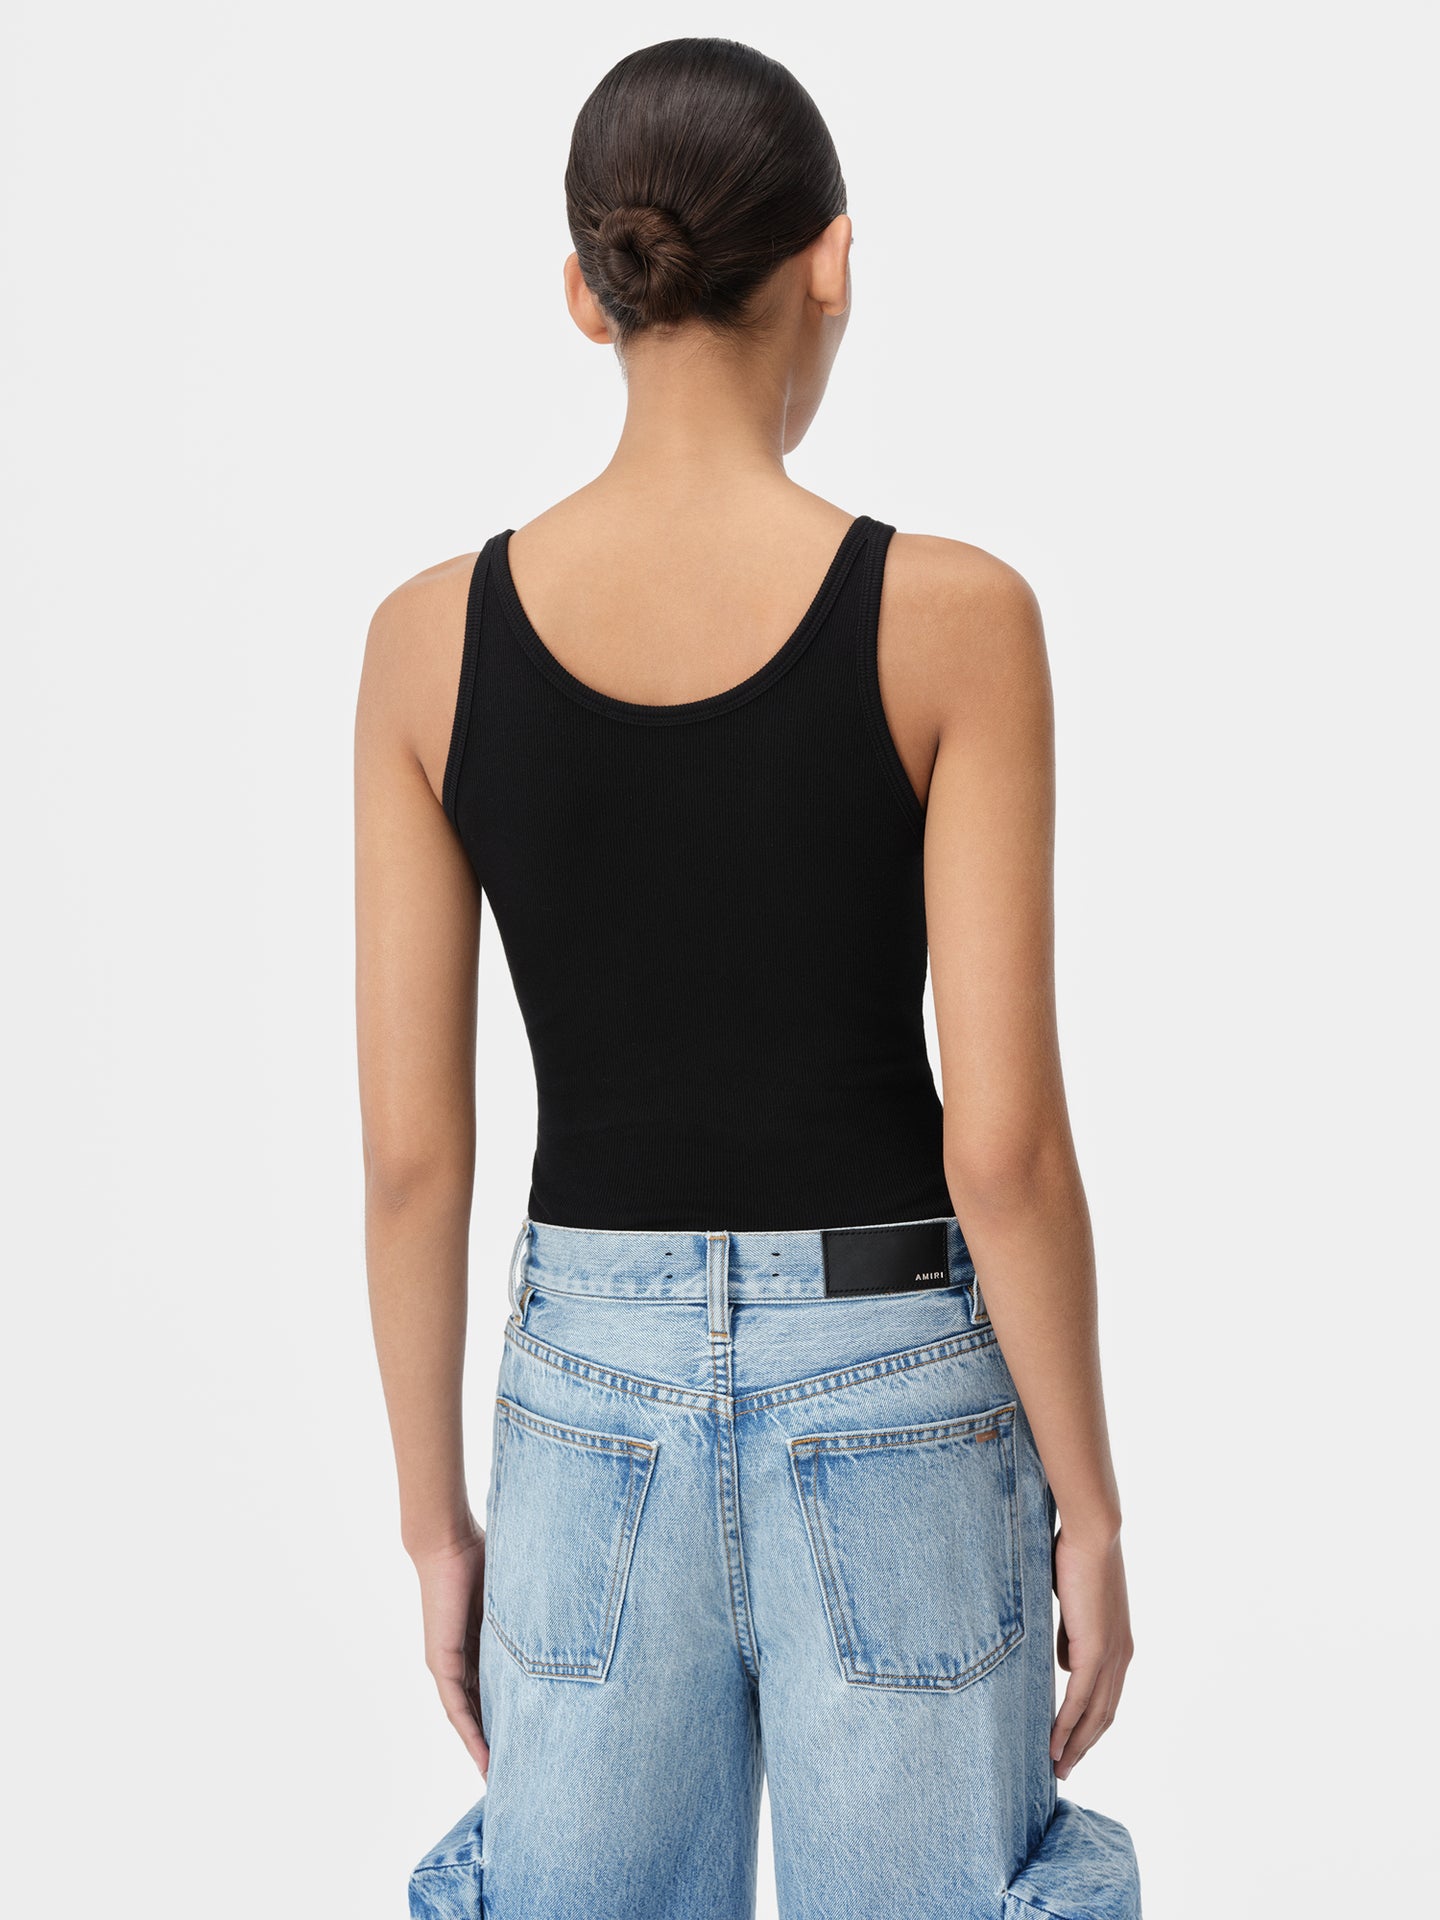 WOMEN - WOMEN'S MA EMBROIDERED RIBBED TANK - Black